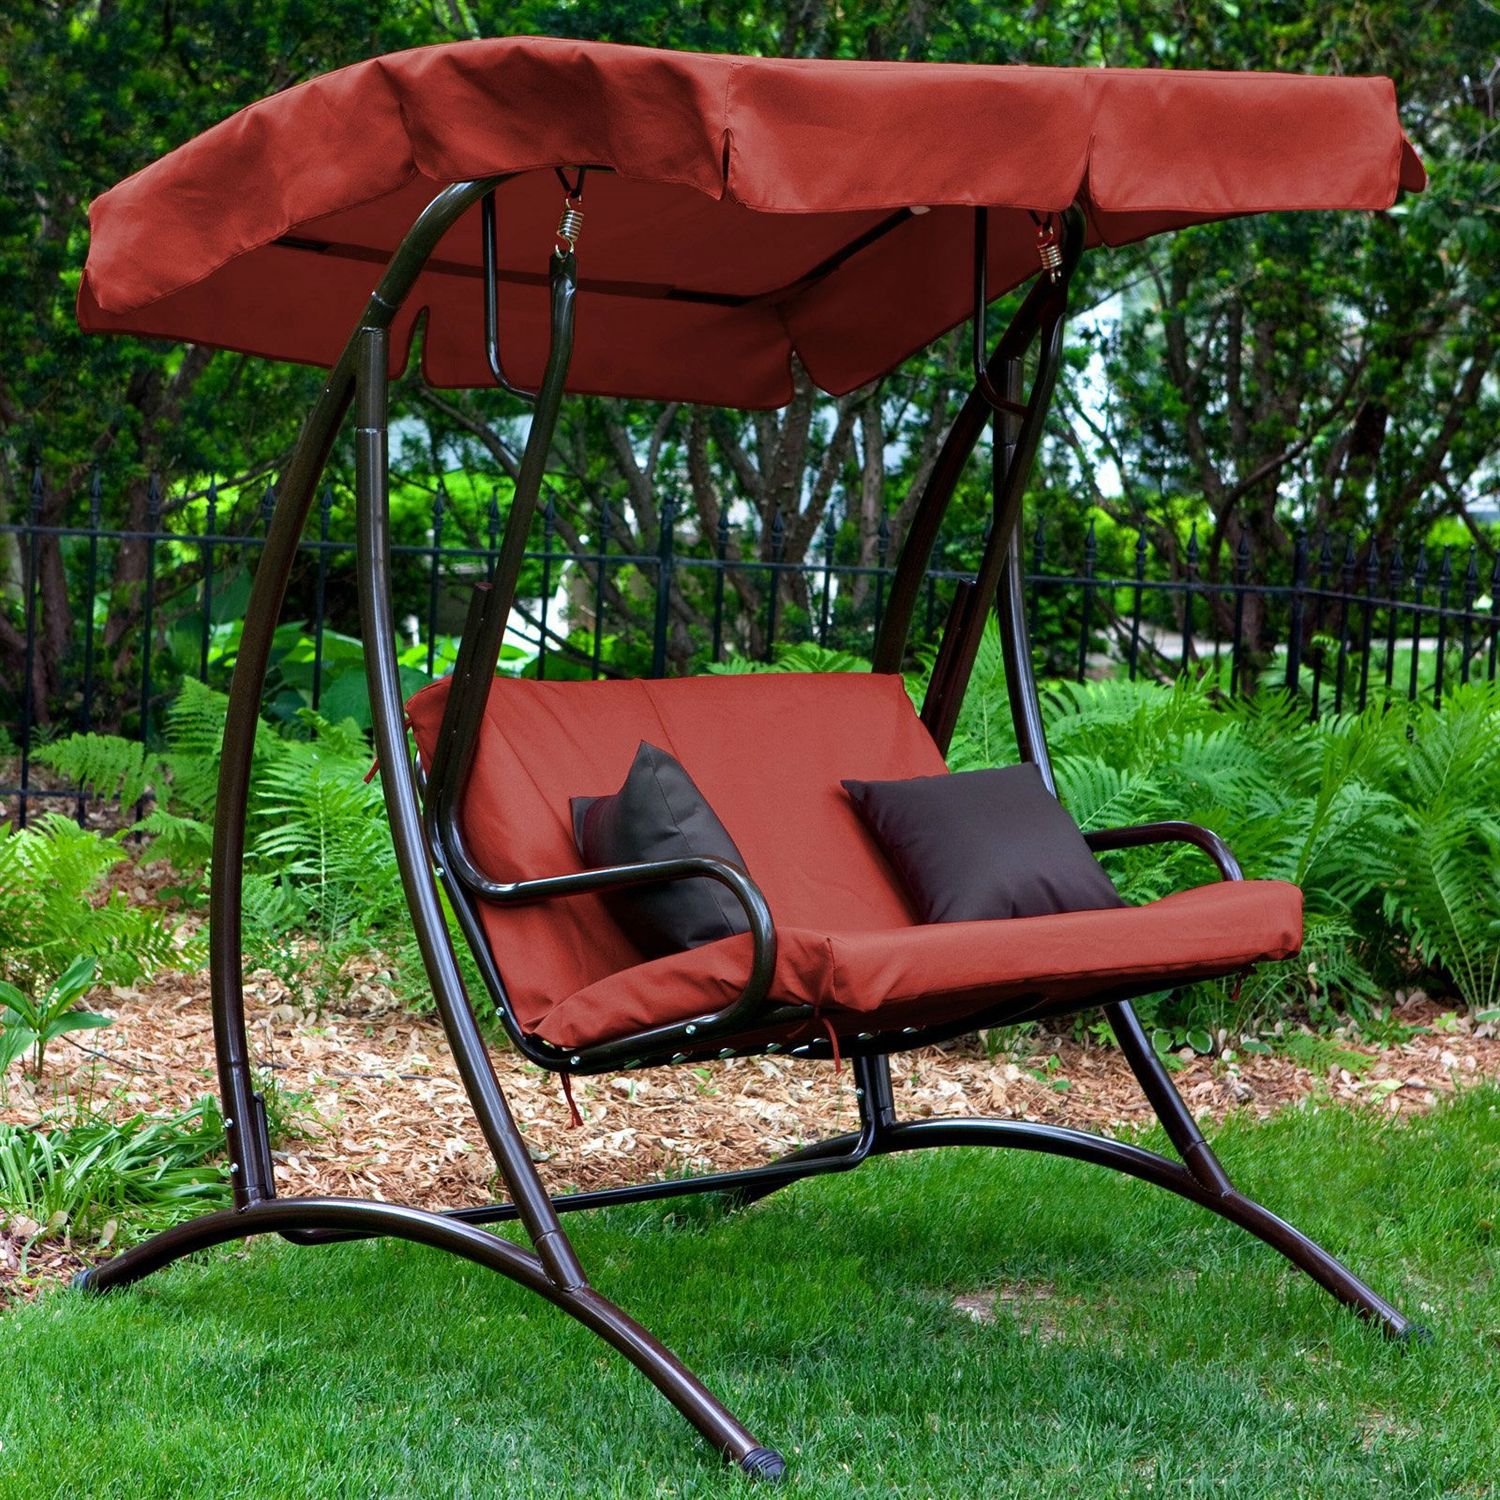 2 Seat Outdoor Porch Swing With Canopy In Terracotta Red Within 2019 Porch Swings With Canopy (View 7 of 25)